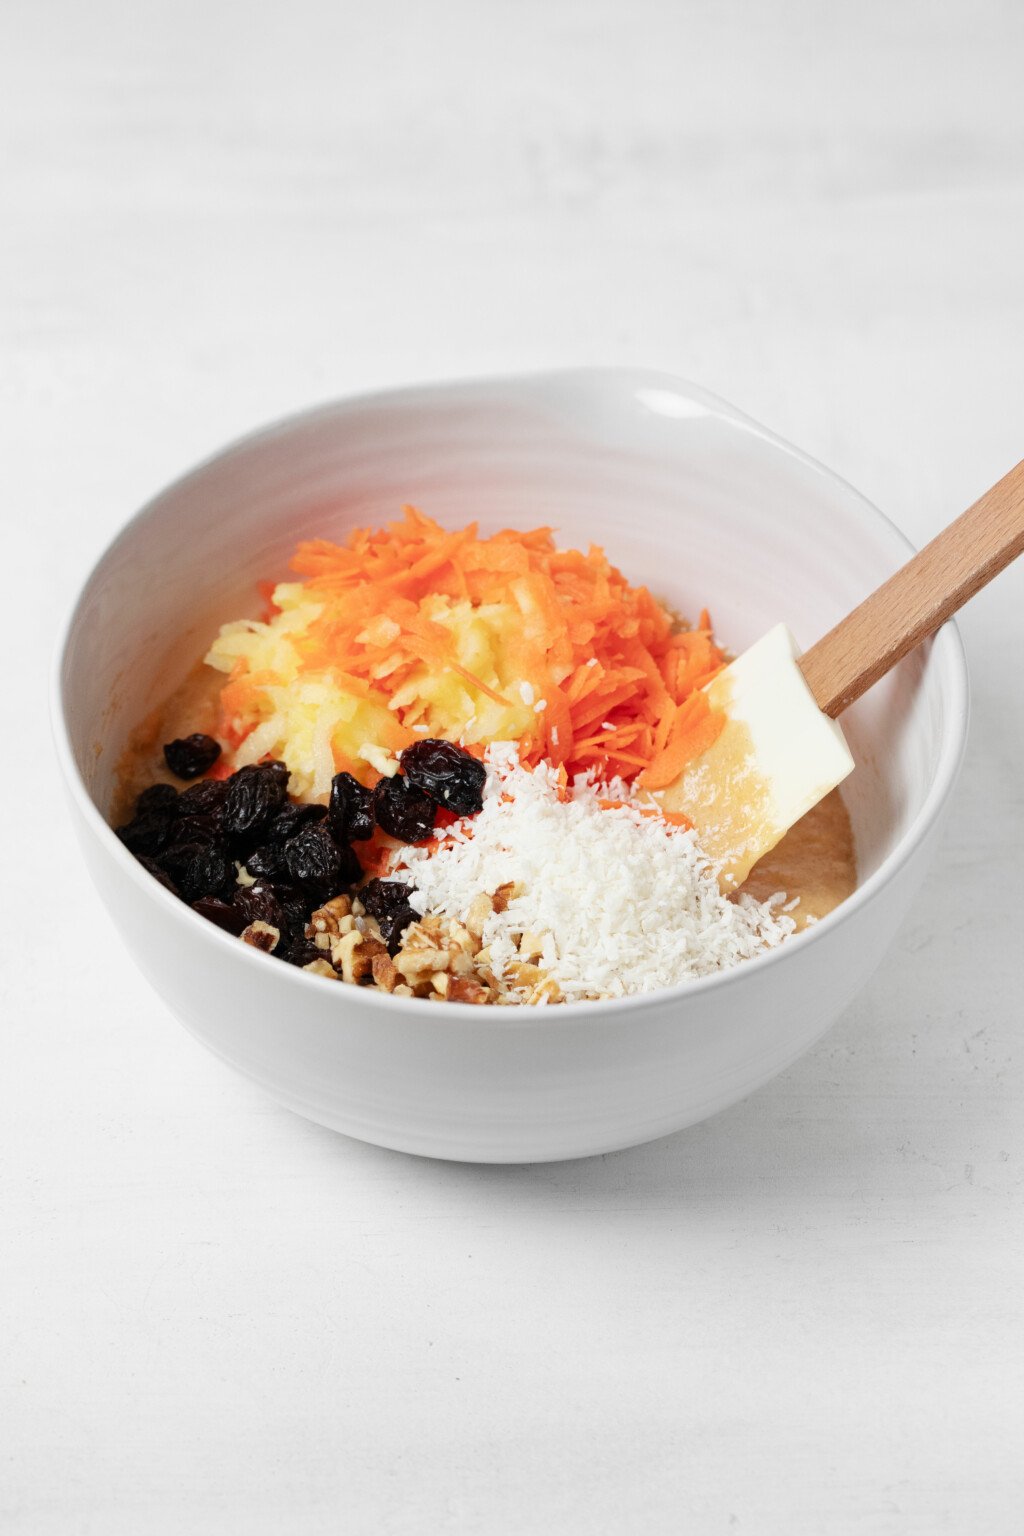 A white mixing bowl is filled with grated carrot, apple, coconut, raisins, and a batter underneath them all.